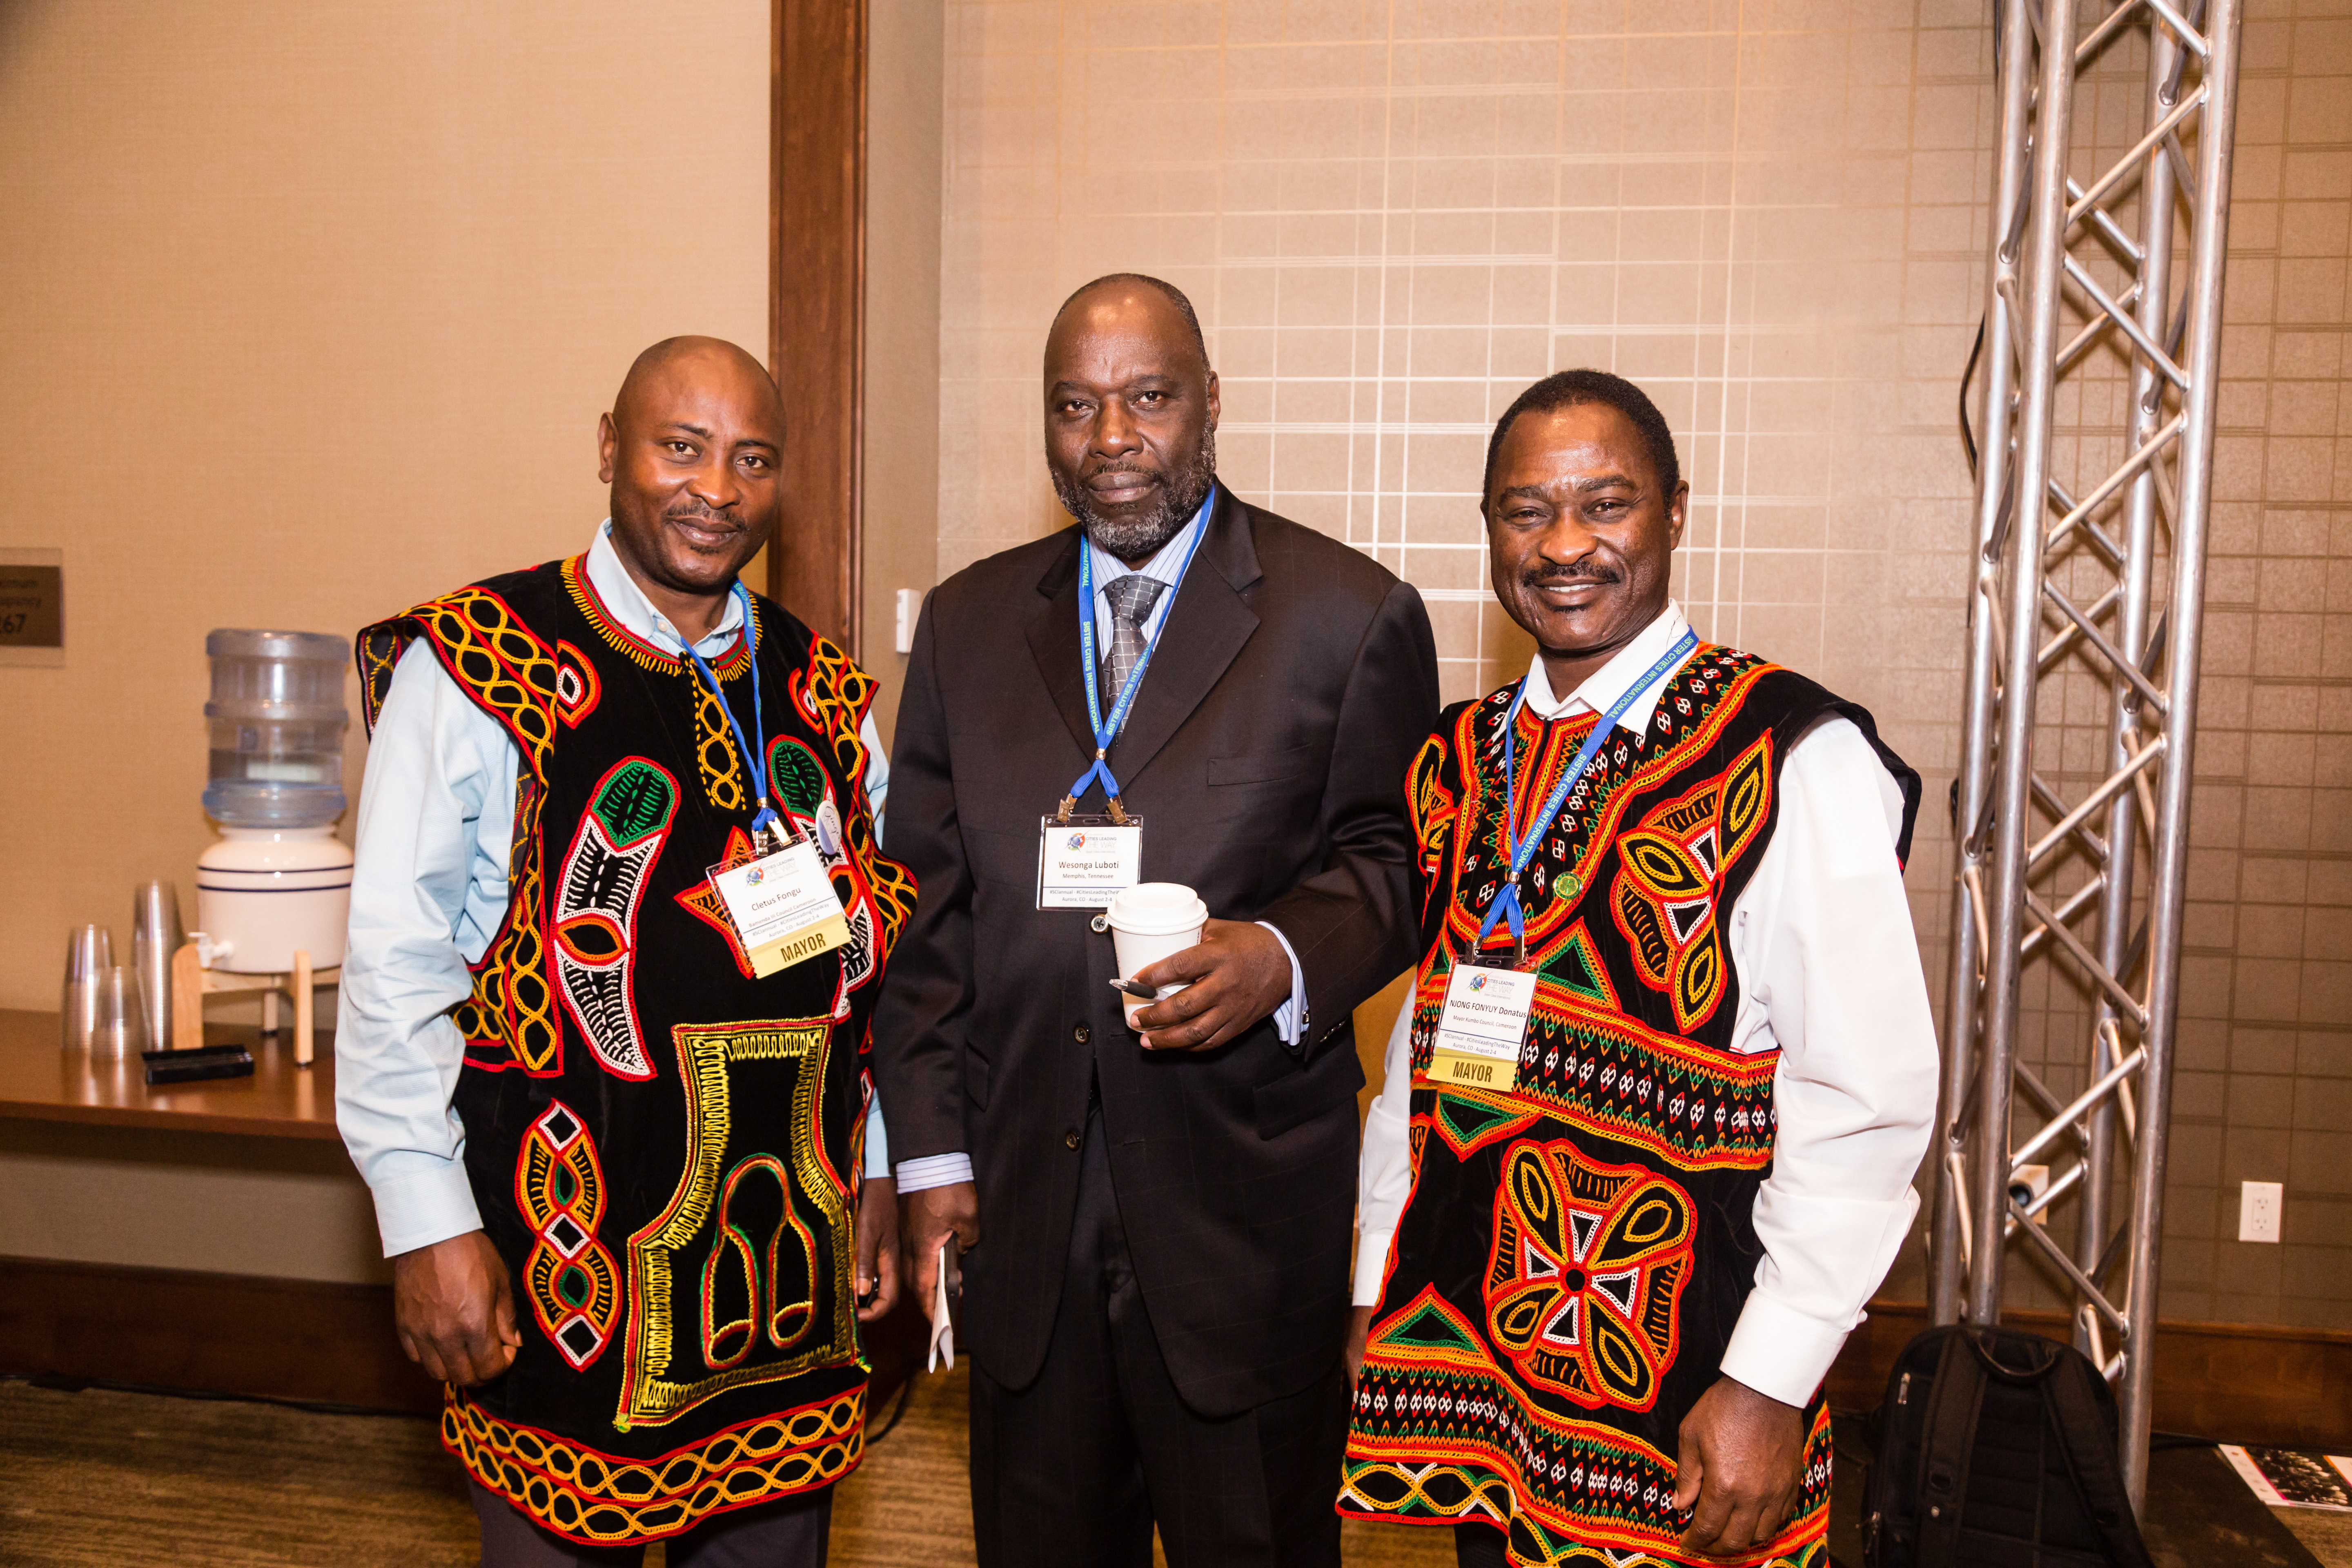 Conference Attendees in International Attire